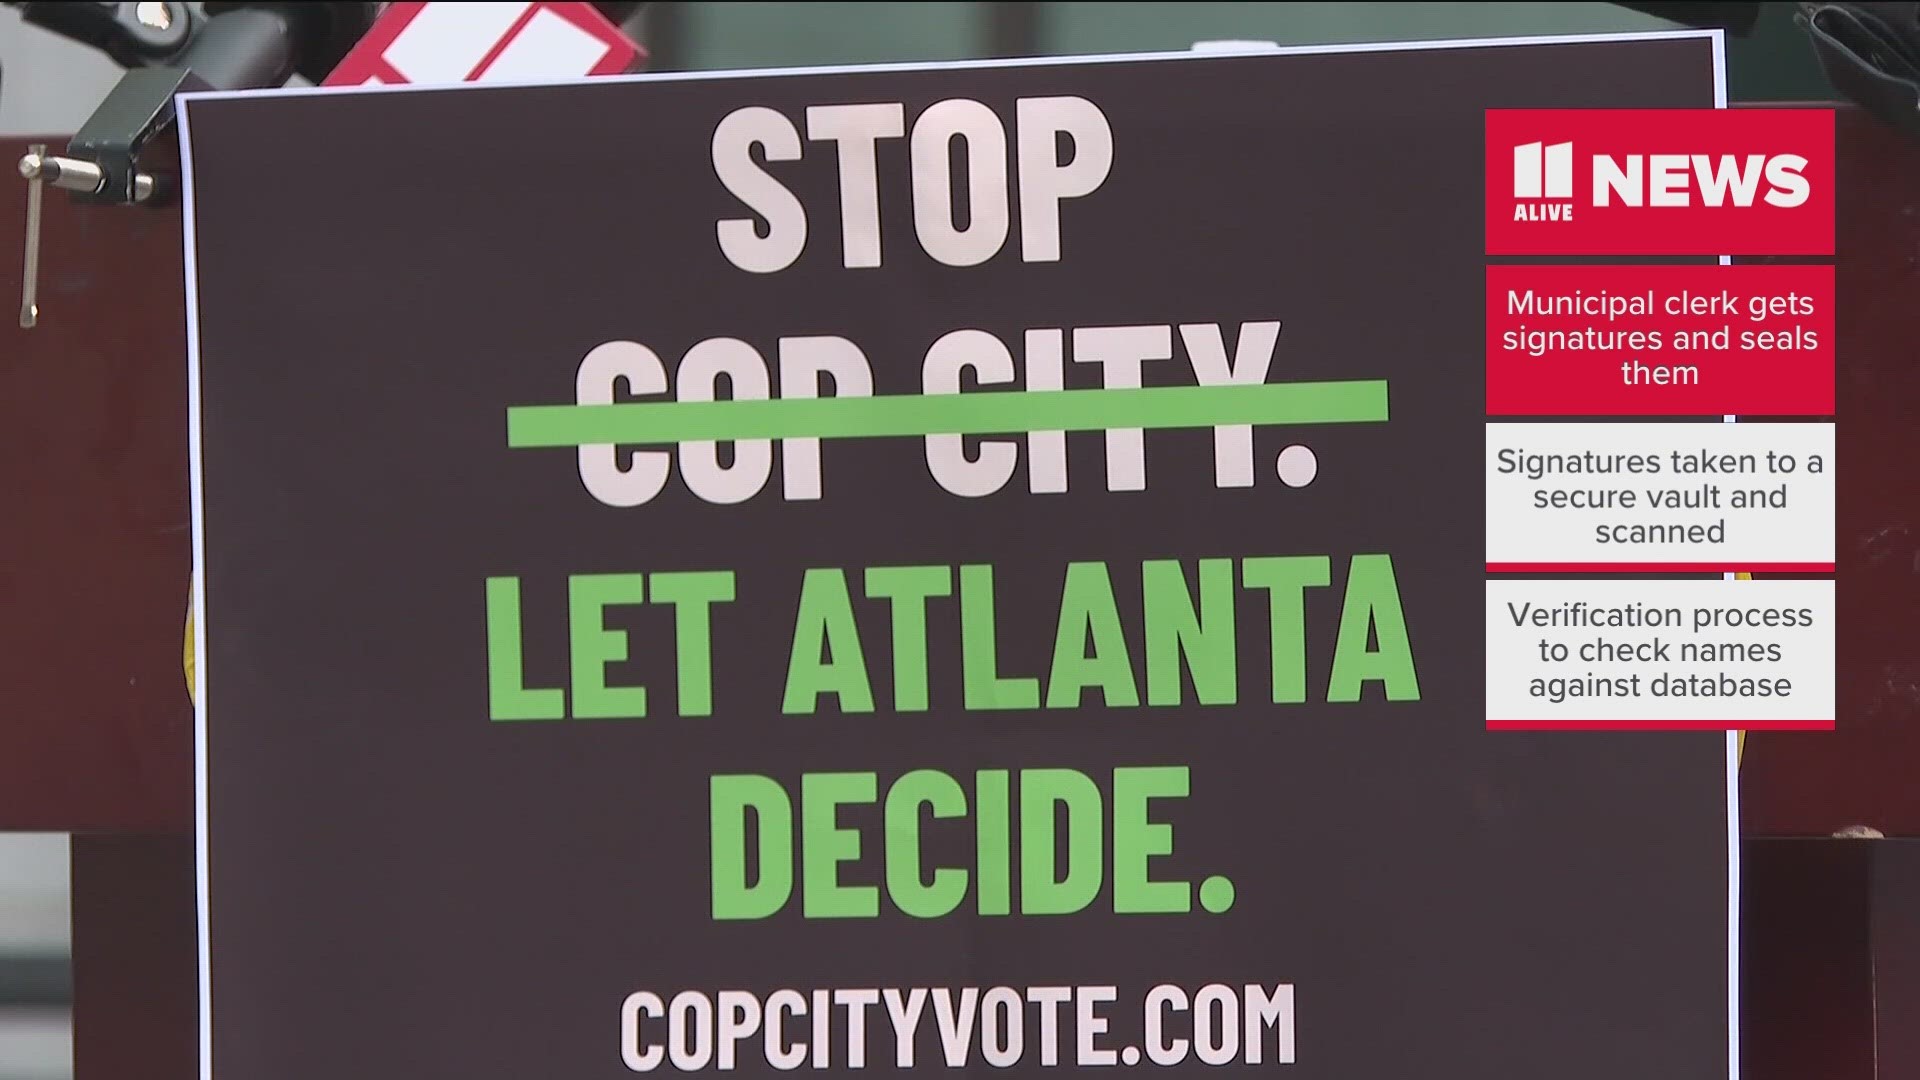 The petition seeks a referendum to revoke funding for the future Atlanta Public Safety Training Center, called "Cop City" by opponents of the project.